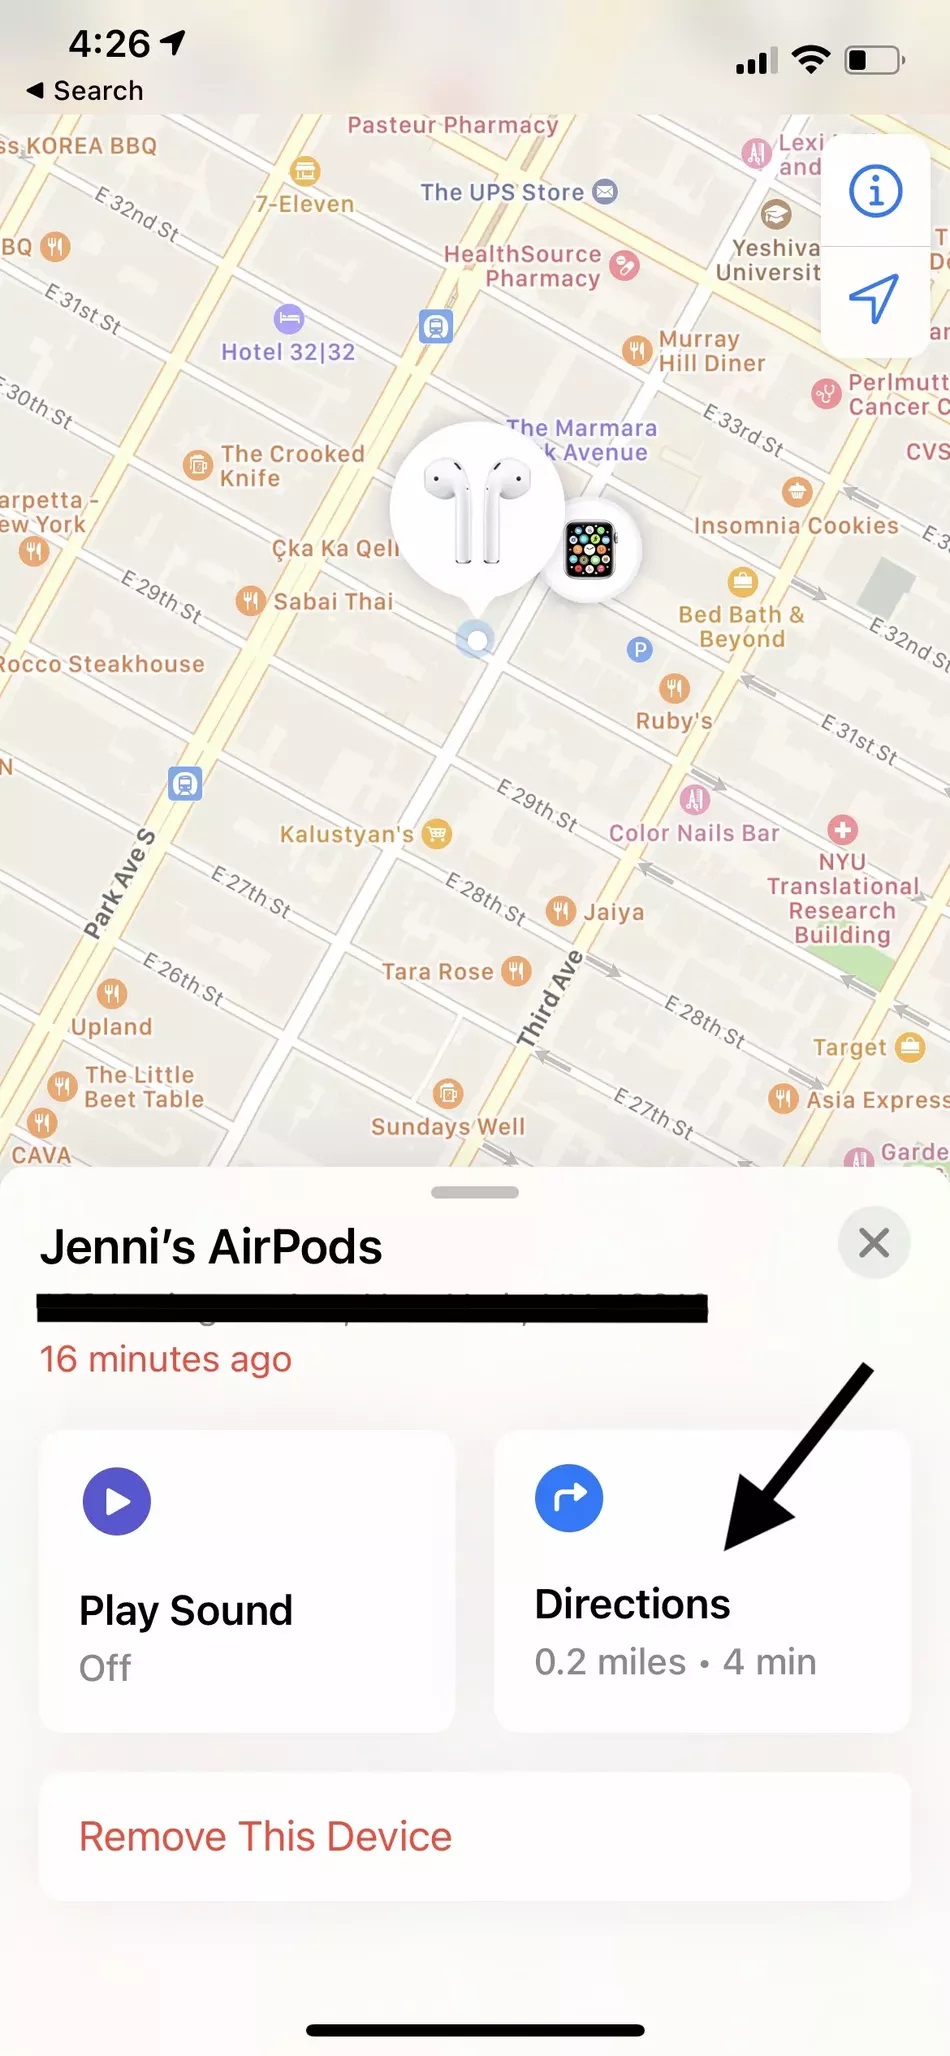 Click on the device to see its last known location on a map